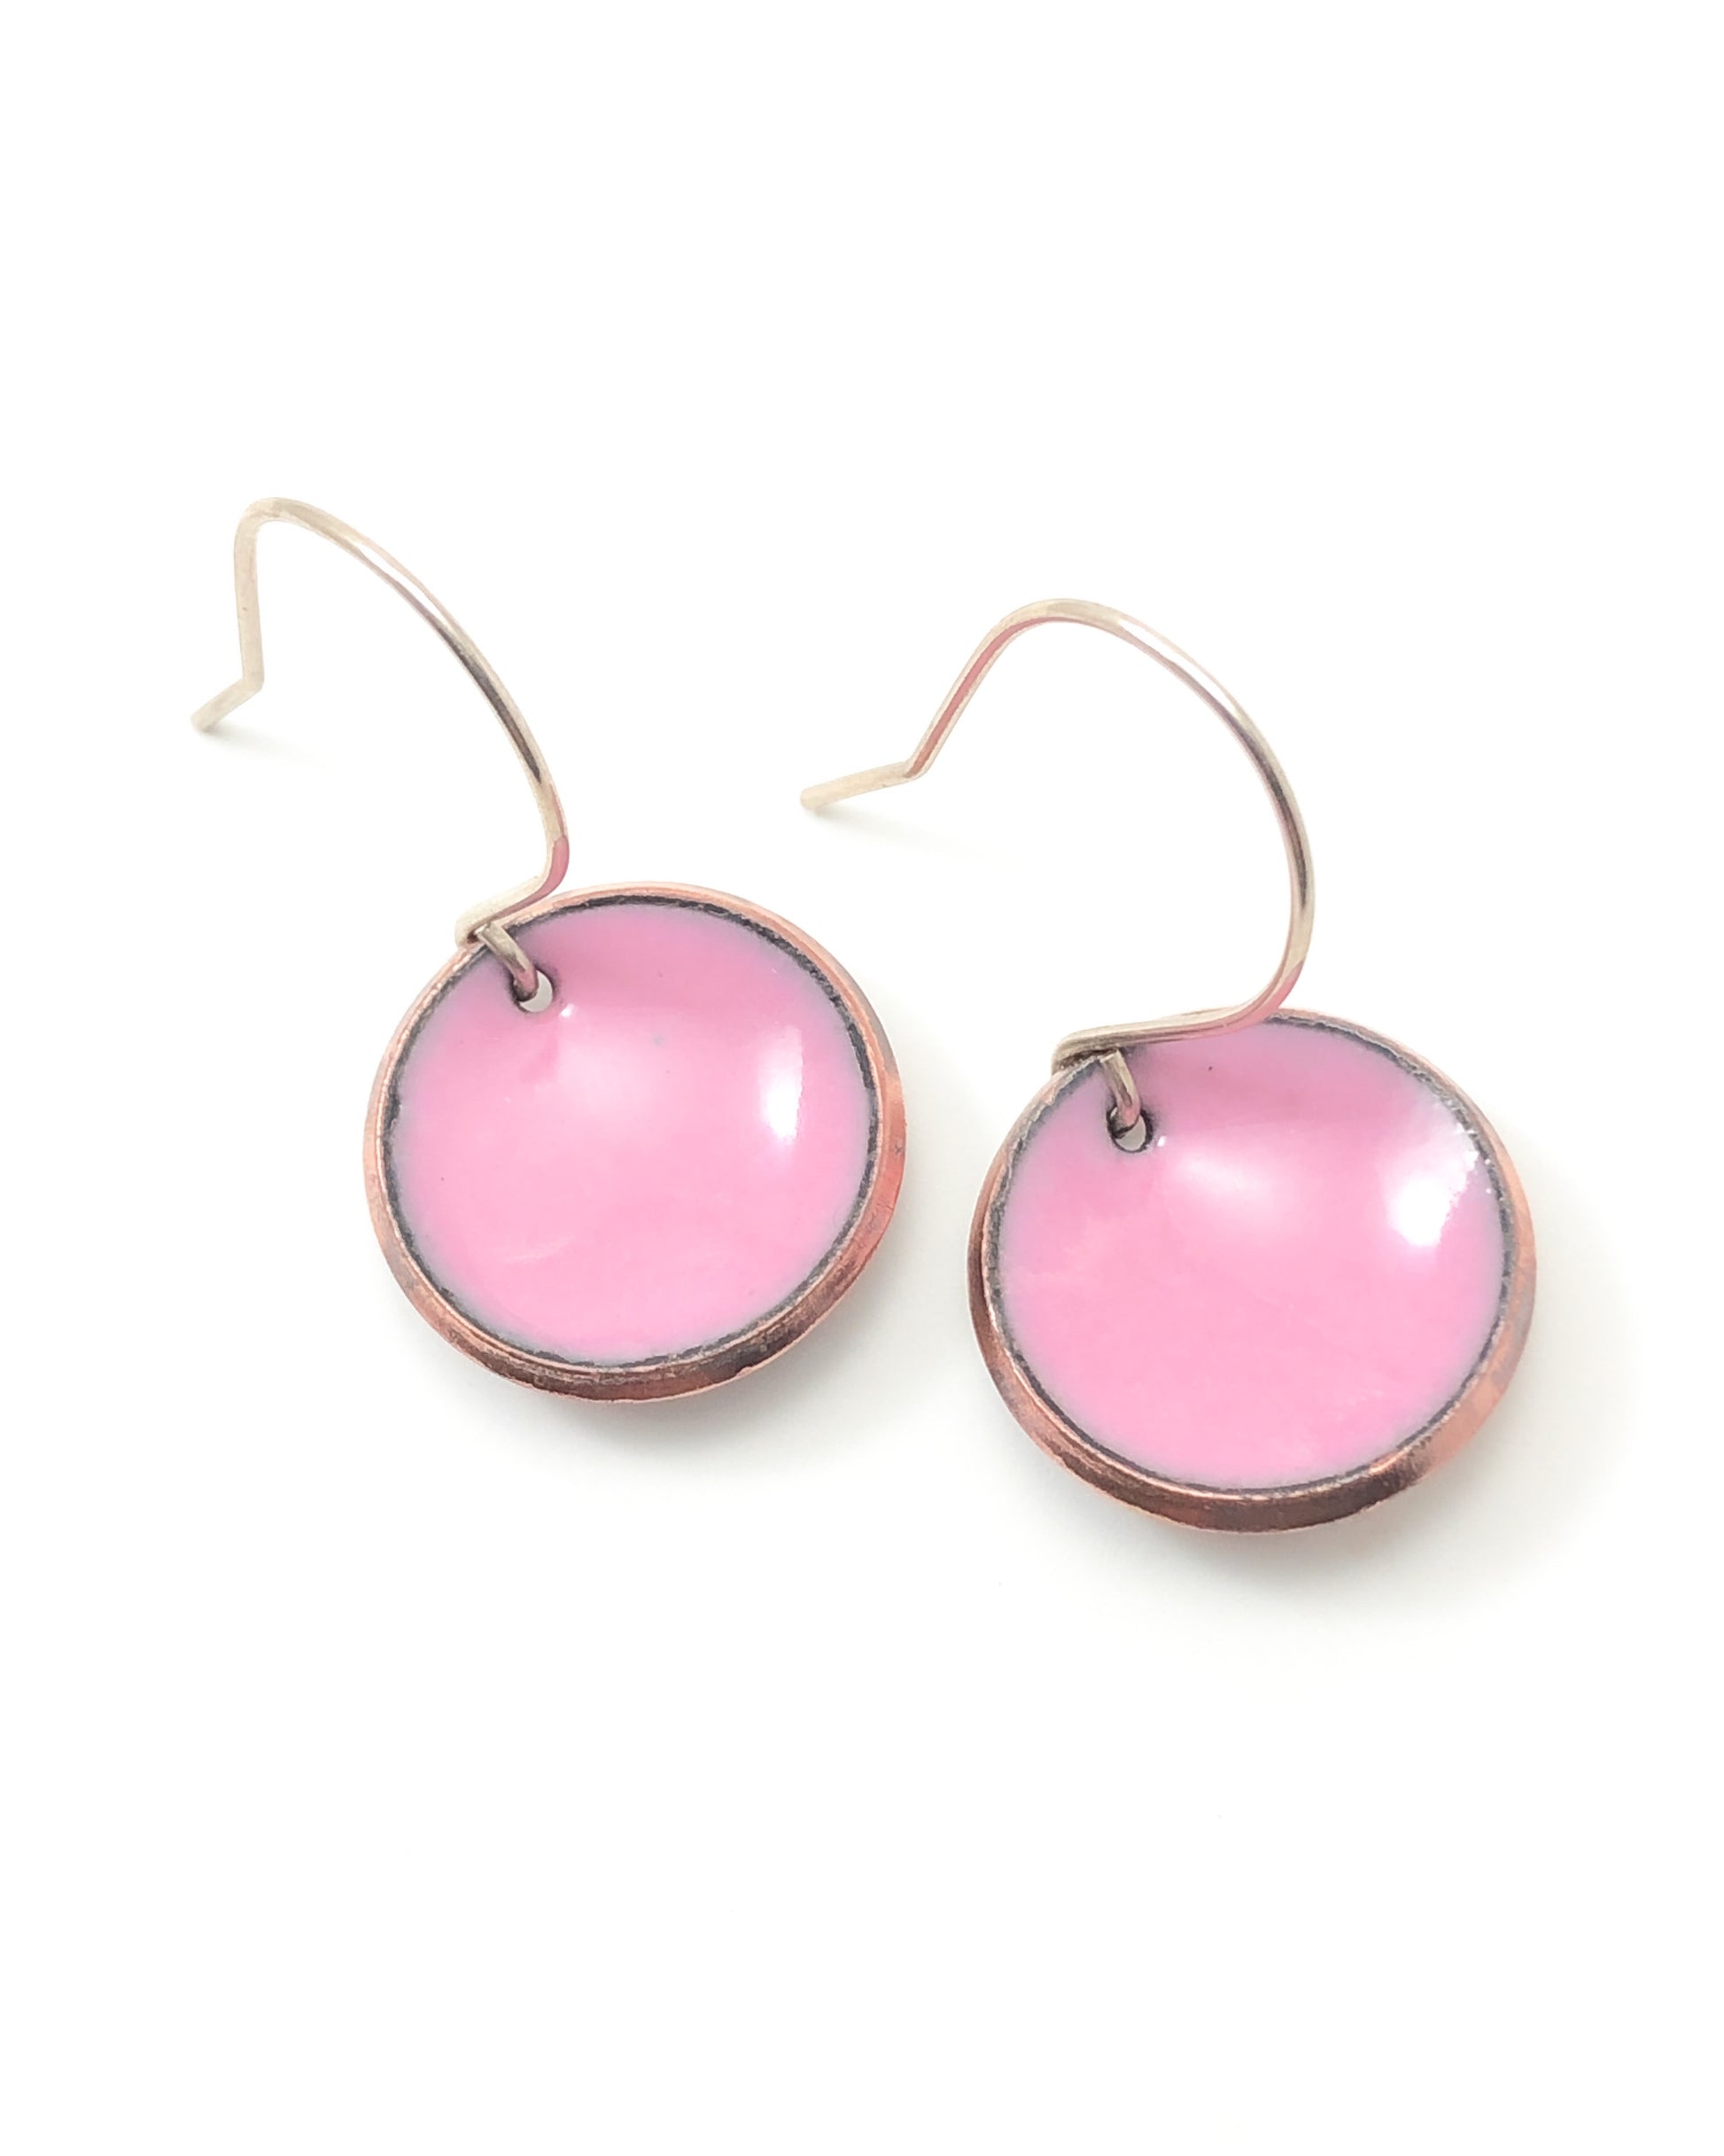 a pair of pink earrings on a white background